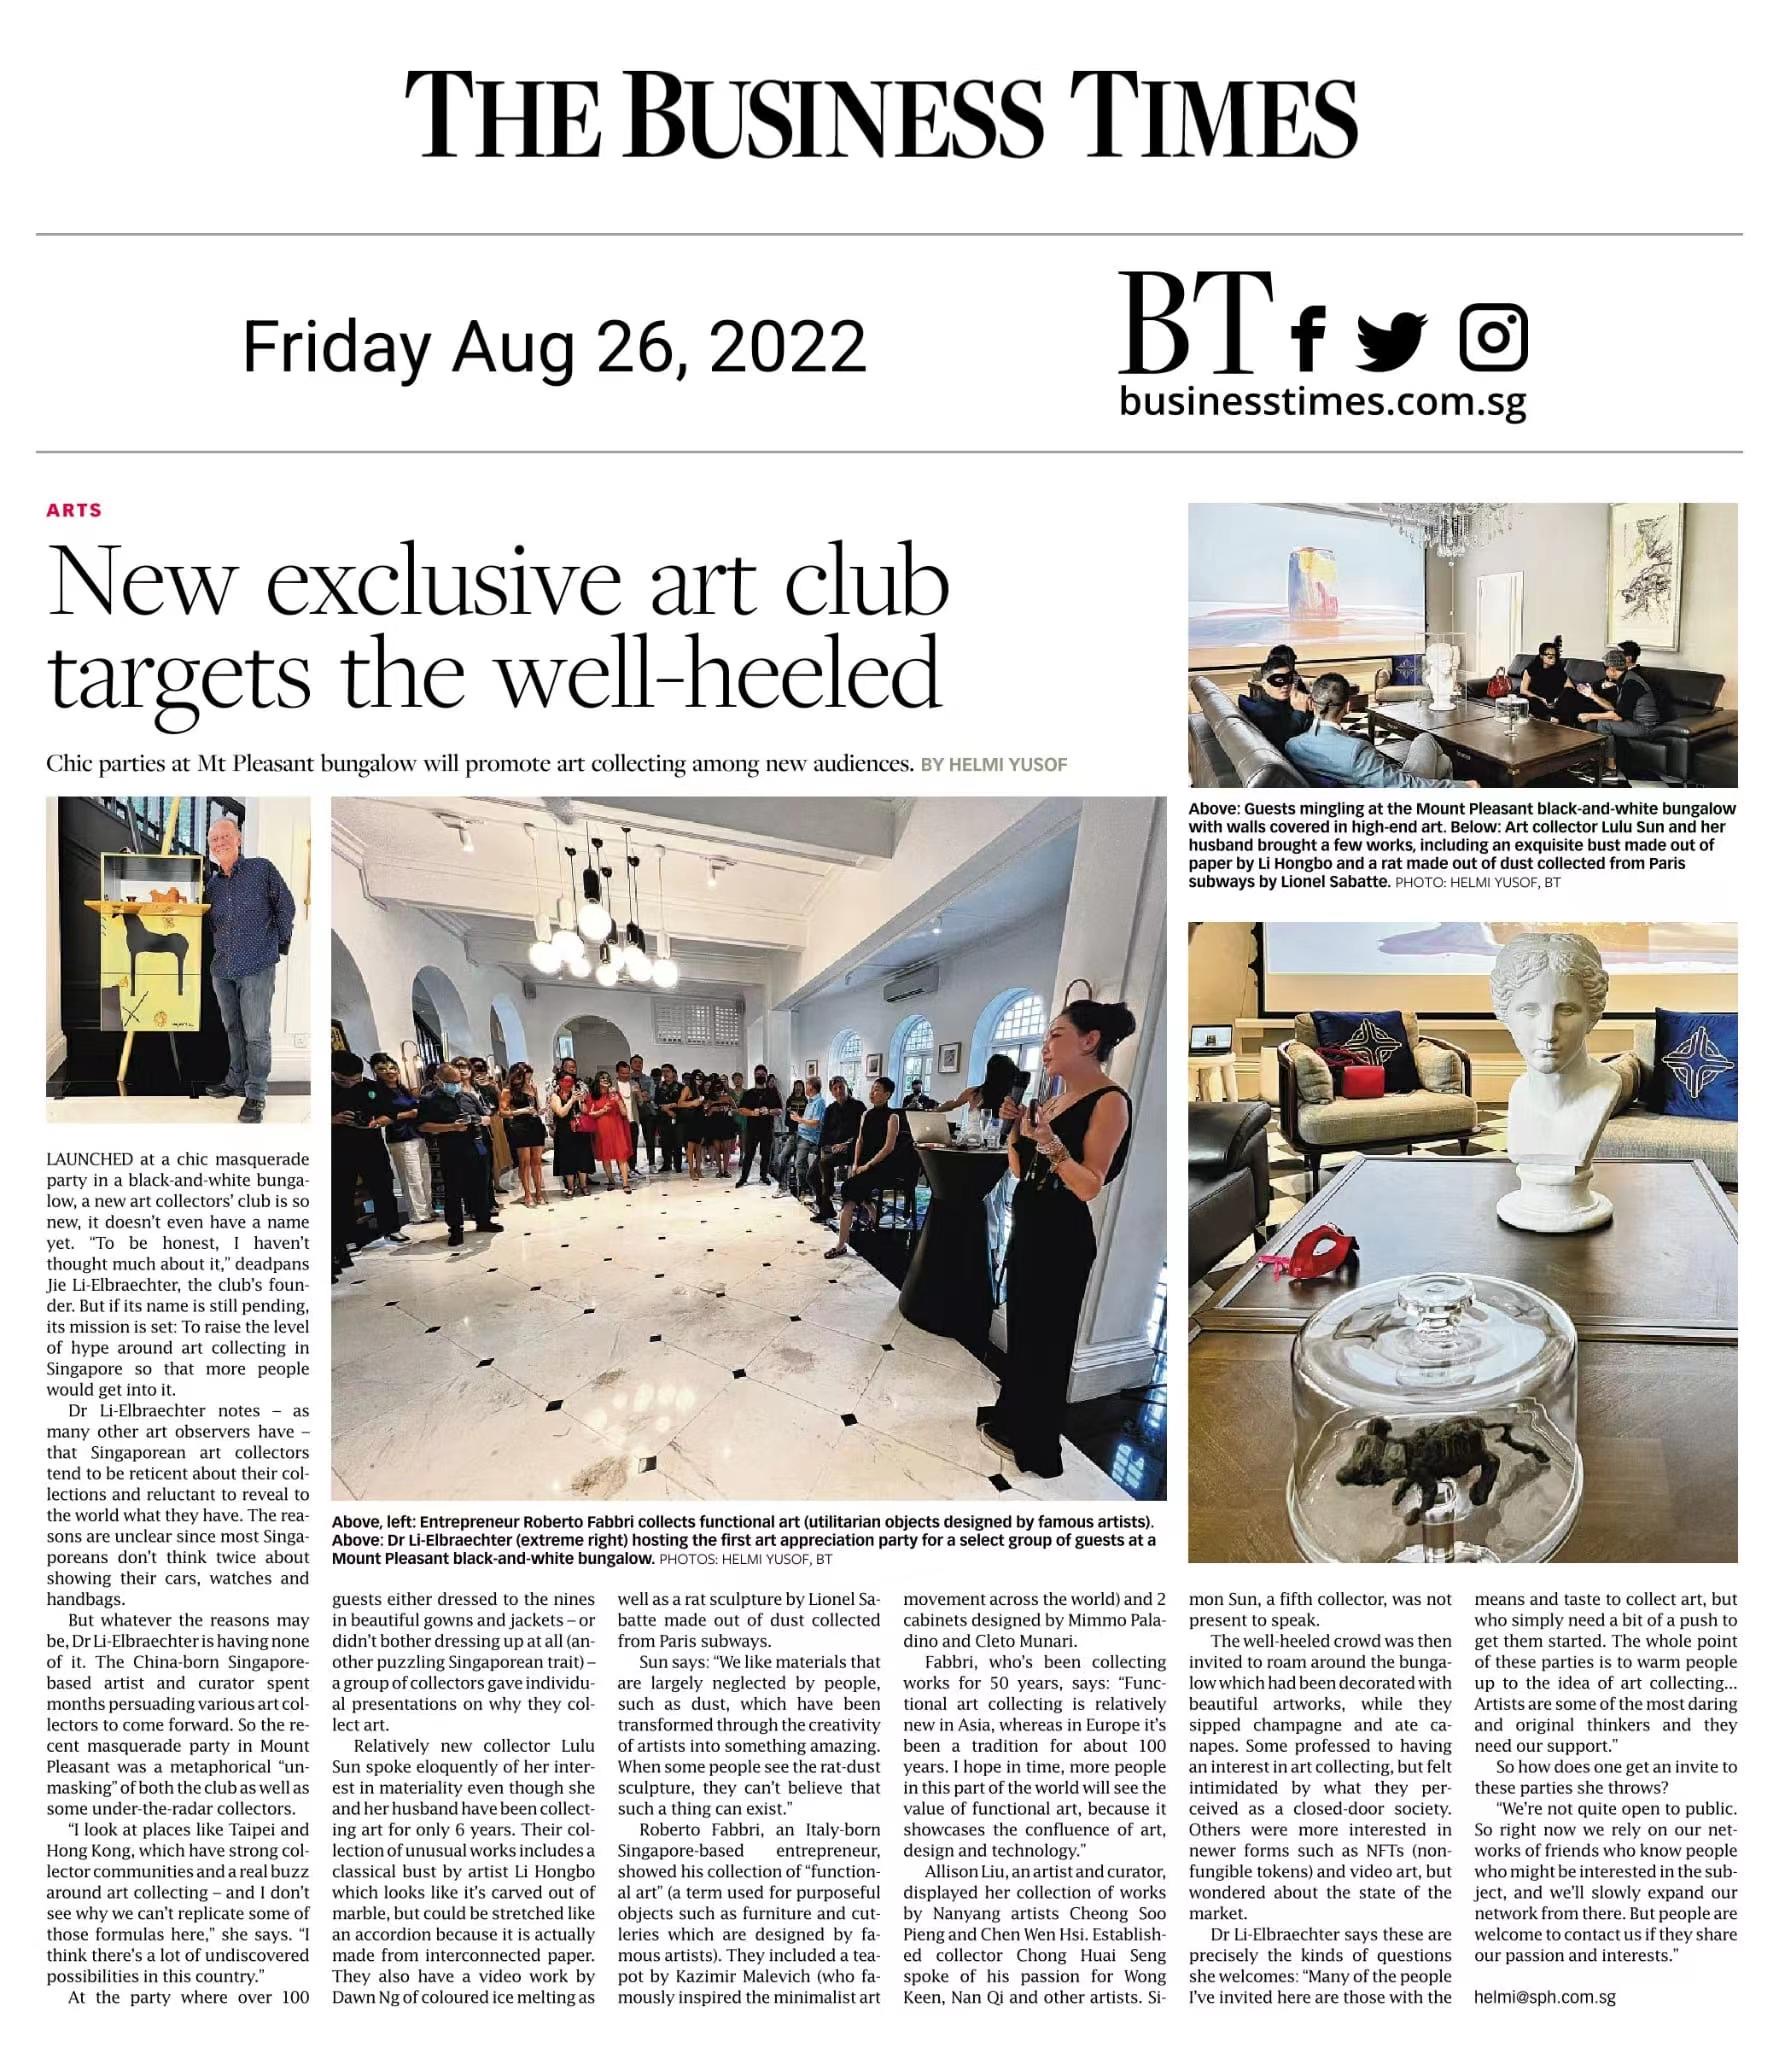 New exclusive art club targets the well-heeled